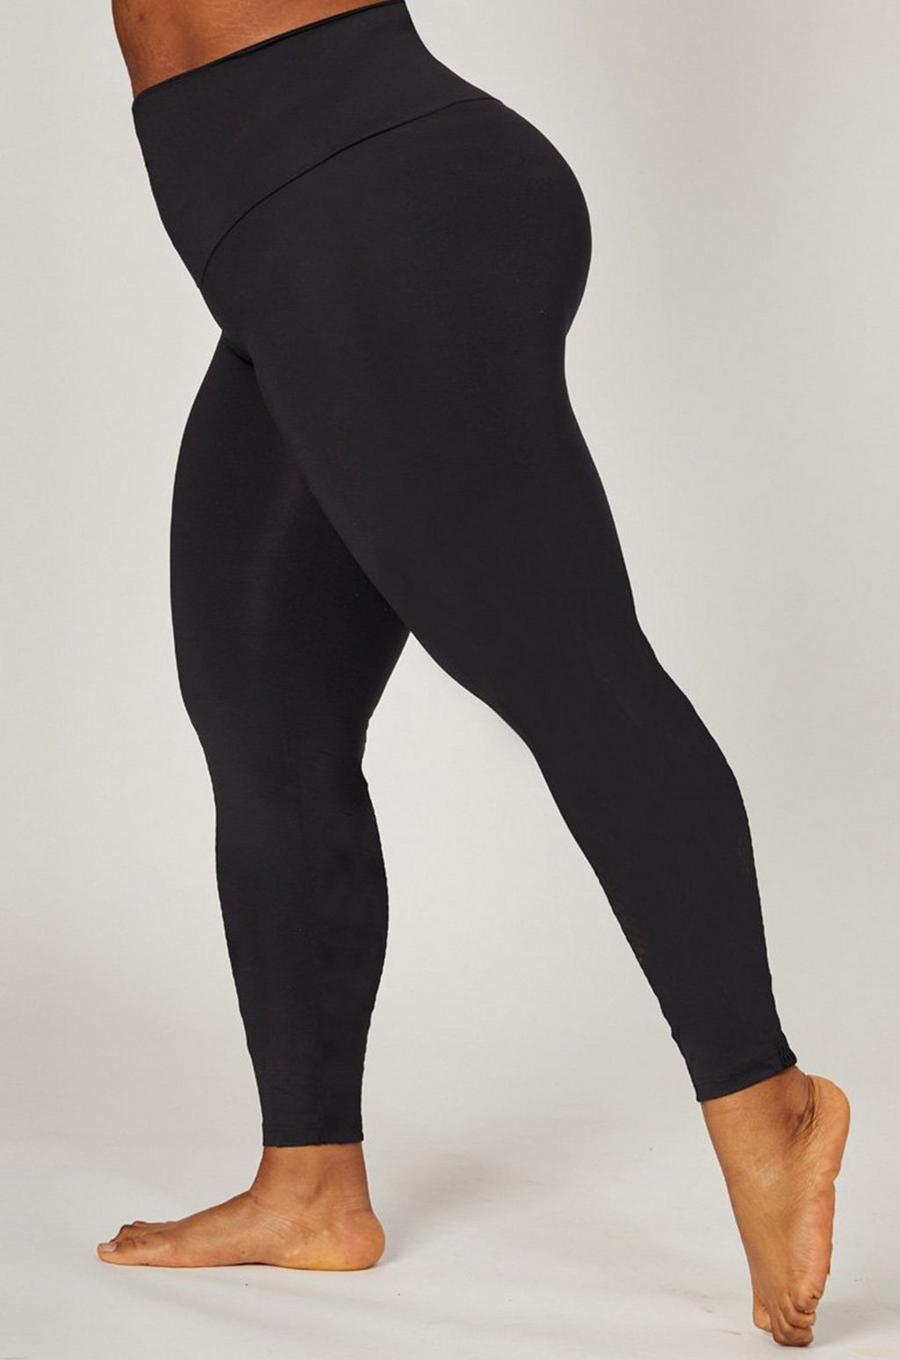 Black Extra Strong Compression Curve Leggings with Tummy Control